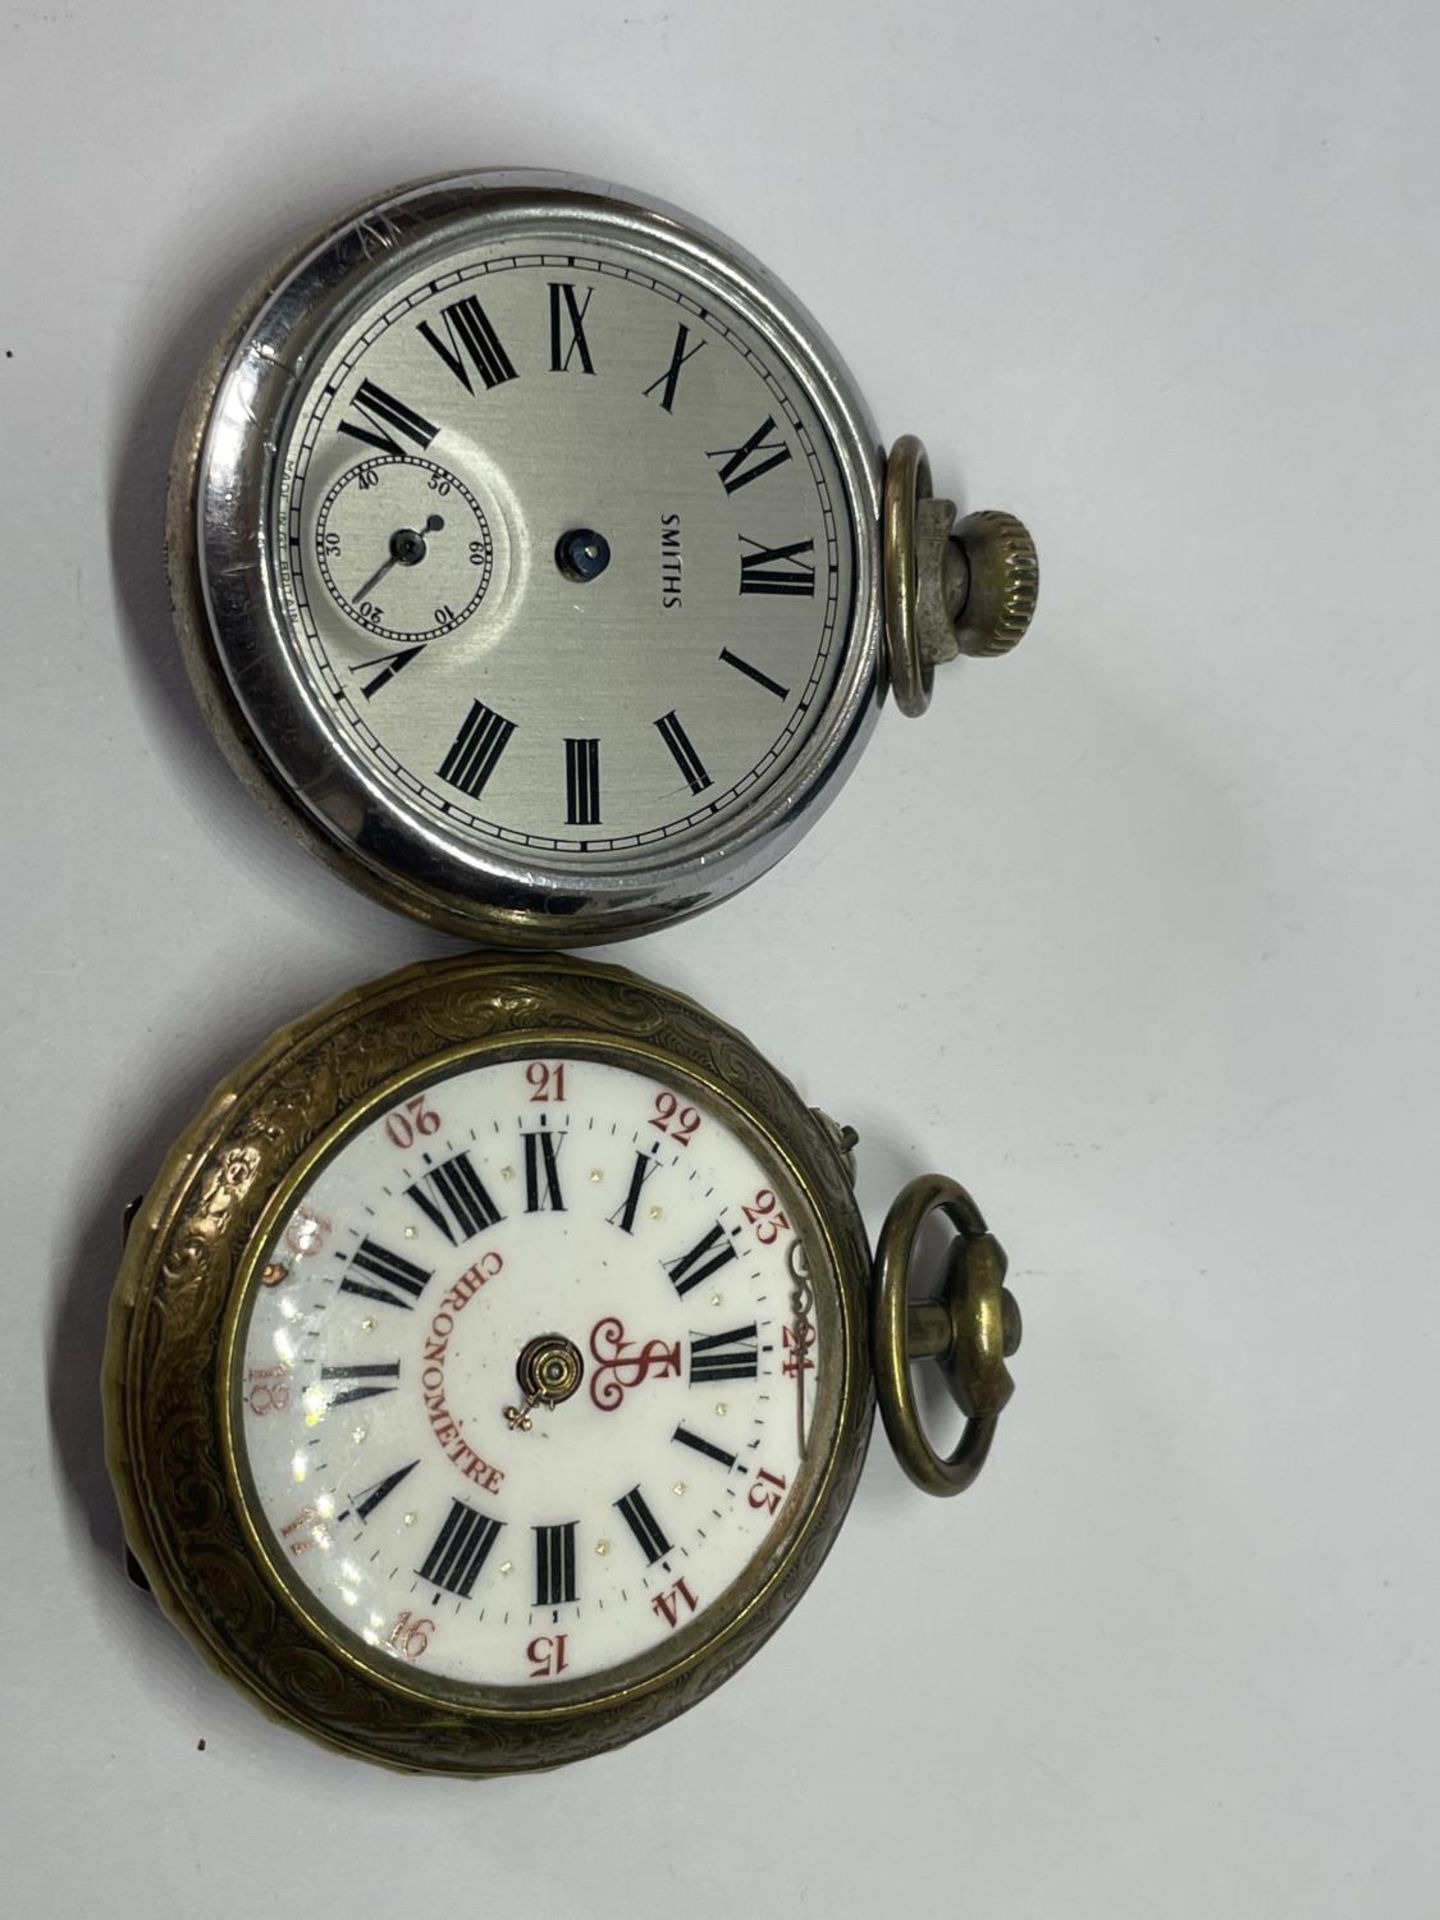 TWO POCKET WATCHES FOR SPARES OR REPAIR